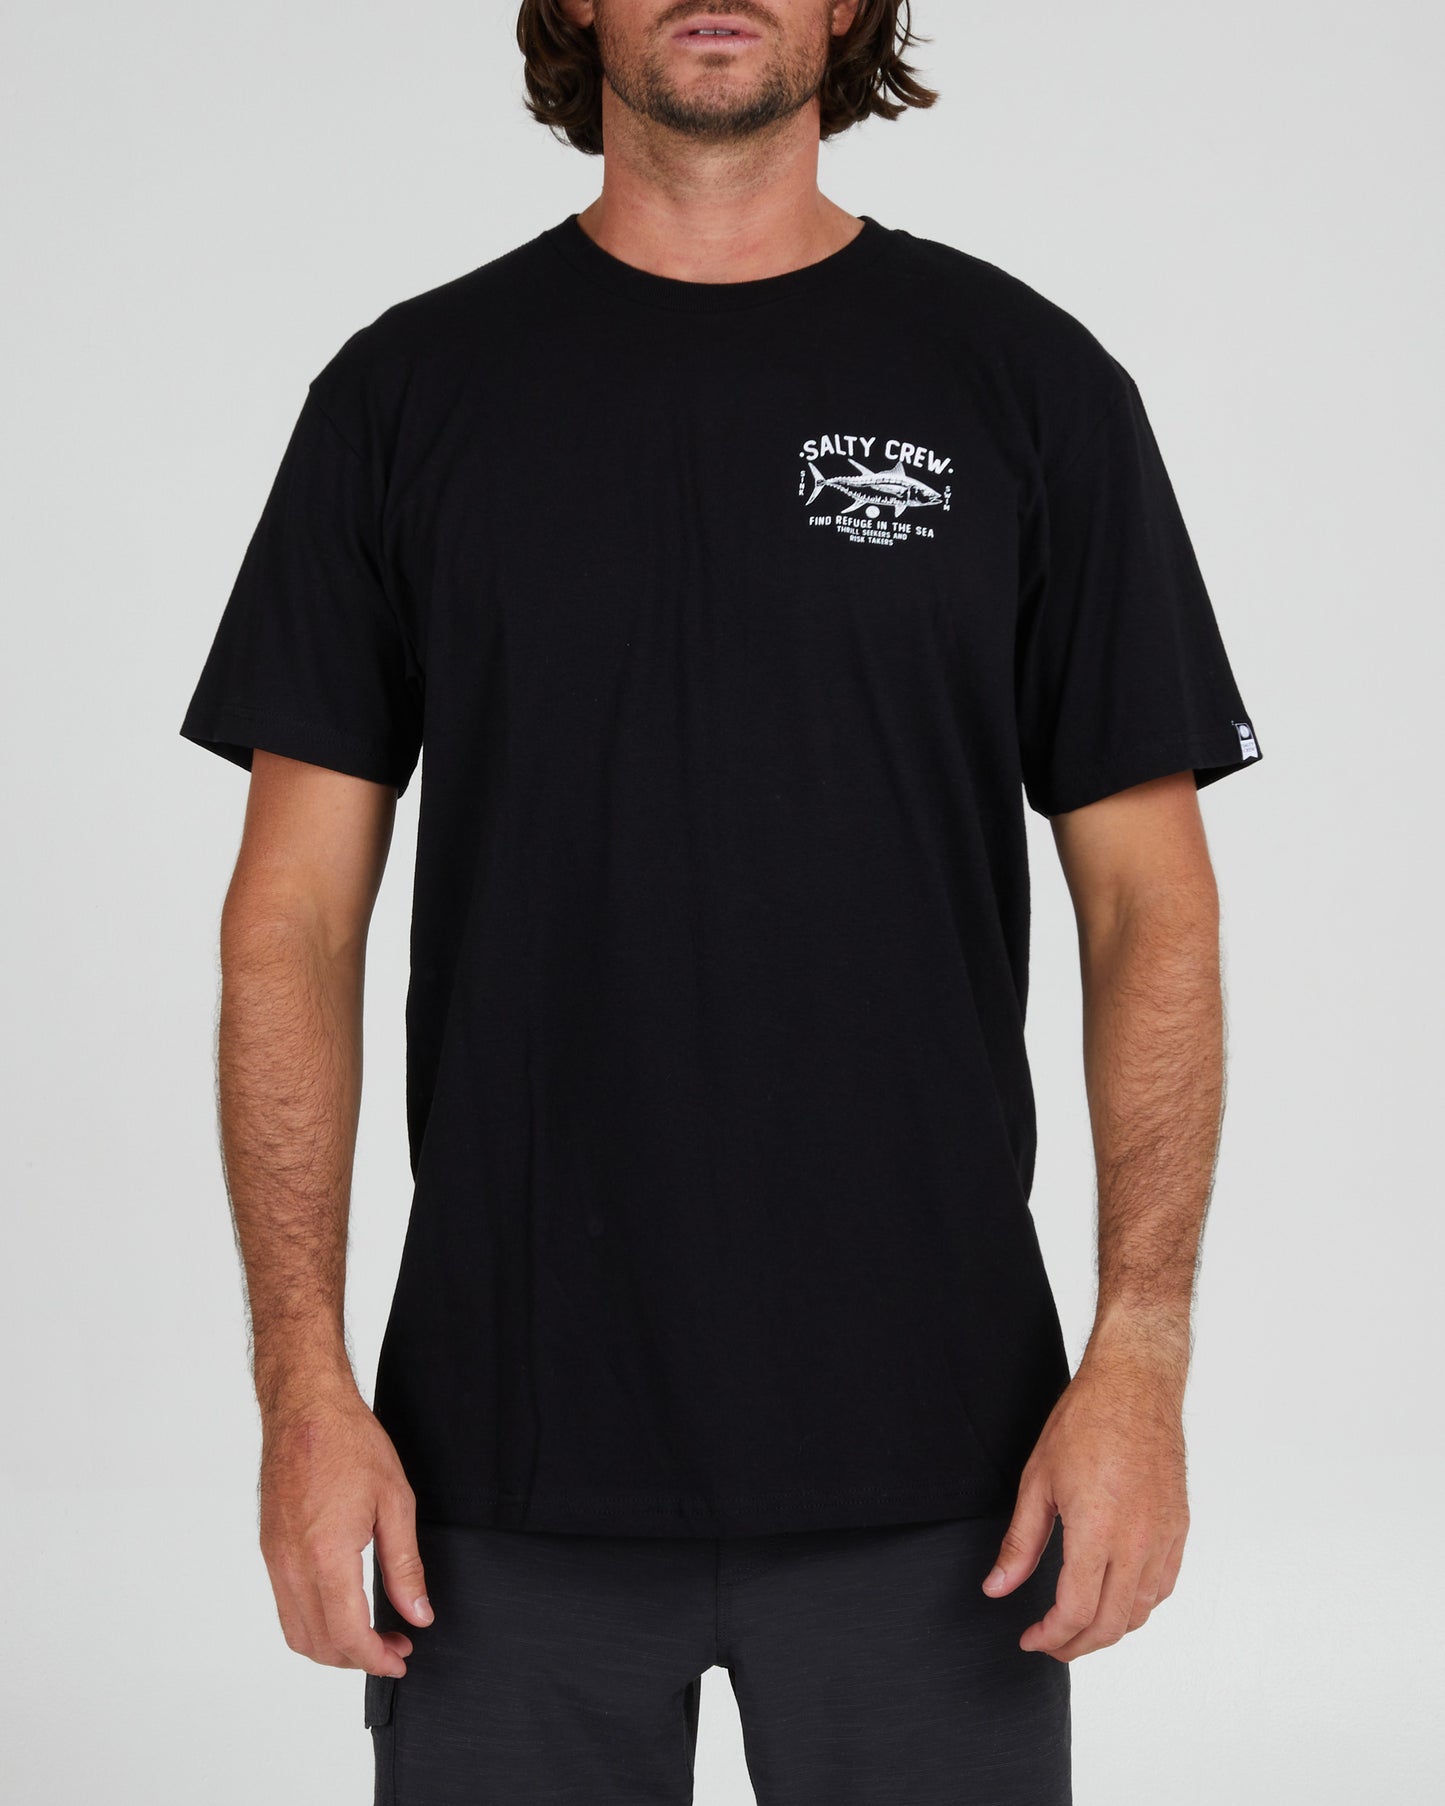 On body front of the Market Black S/S Standard Tee